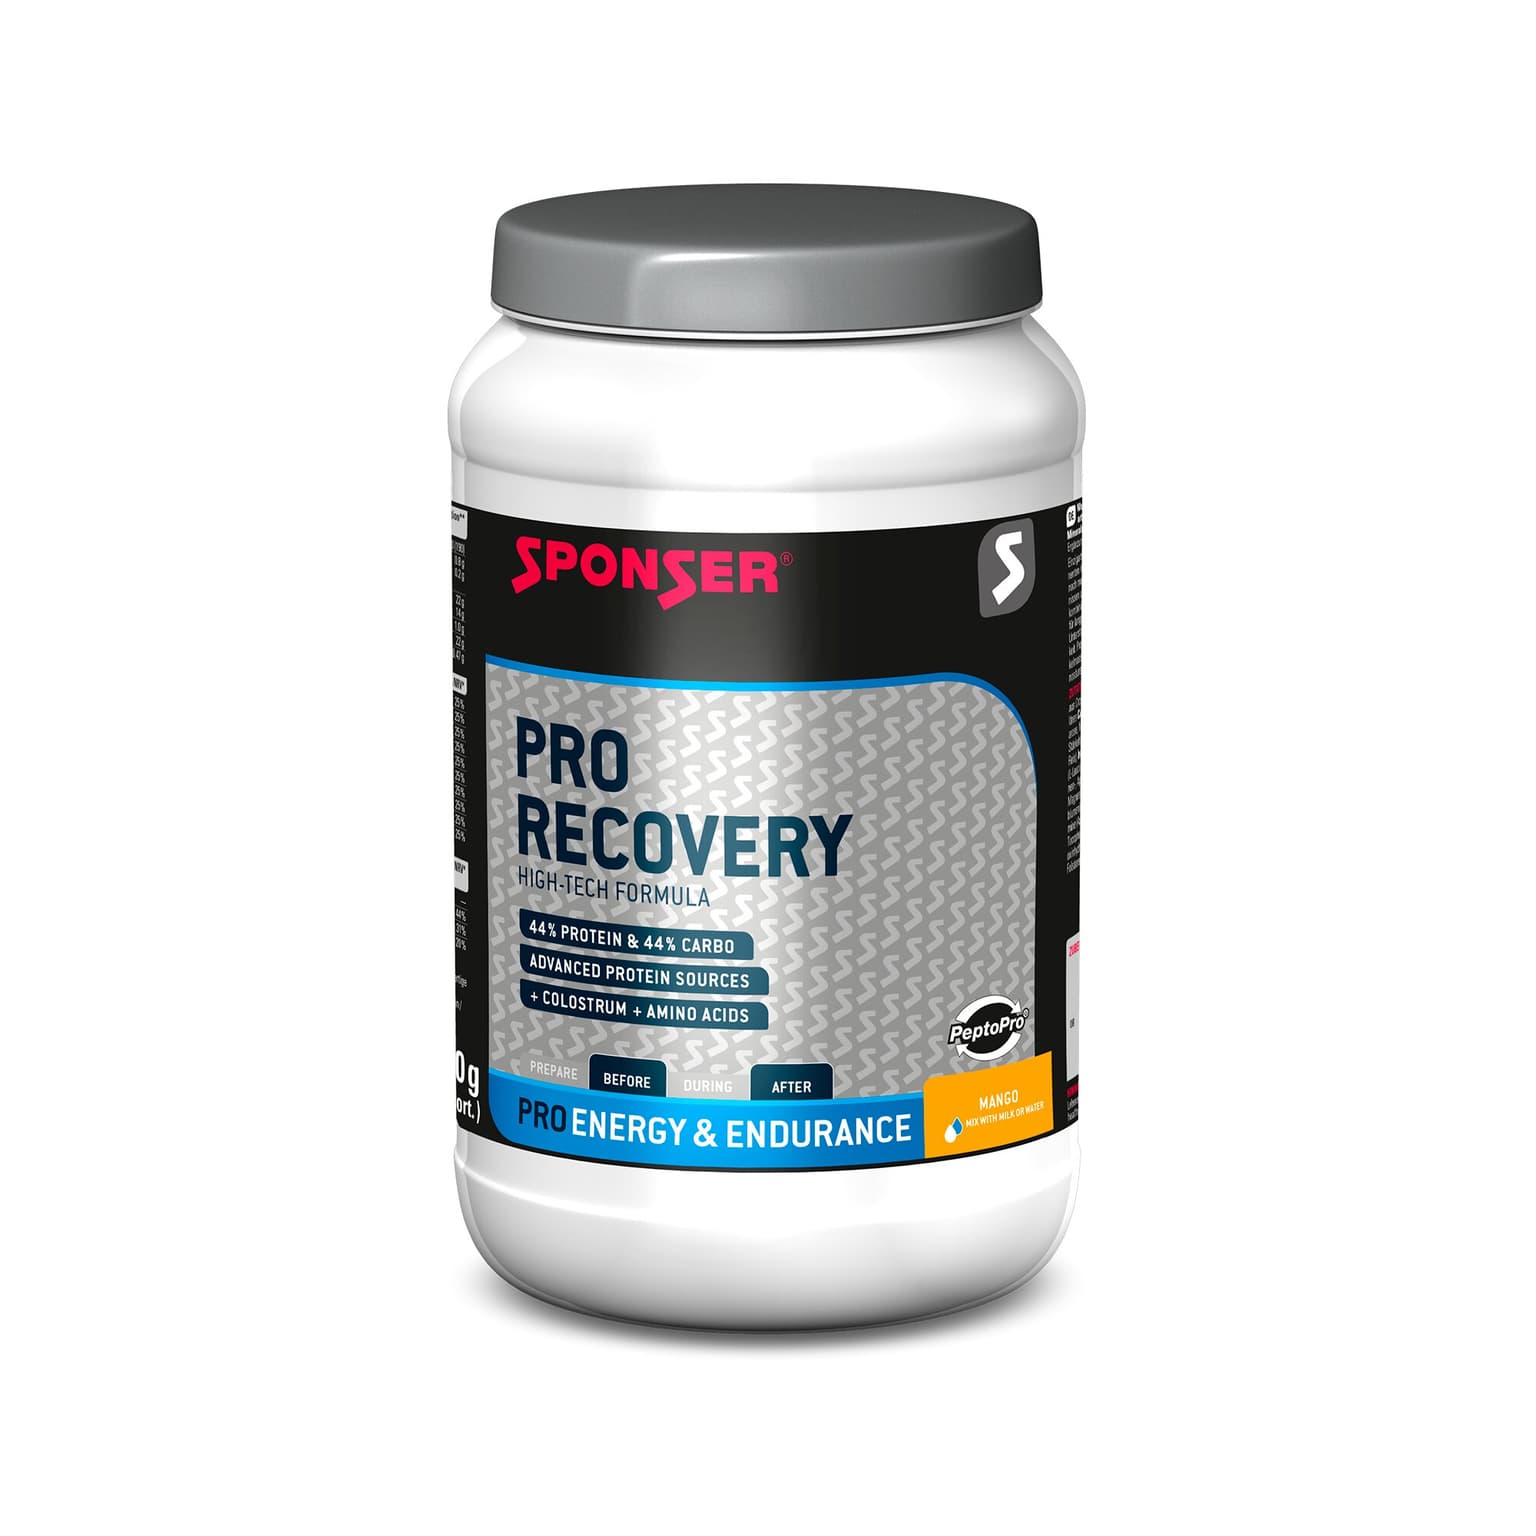 Sponser Sponser Pro Recovery Proteinpulver policromo 1